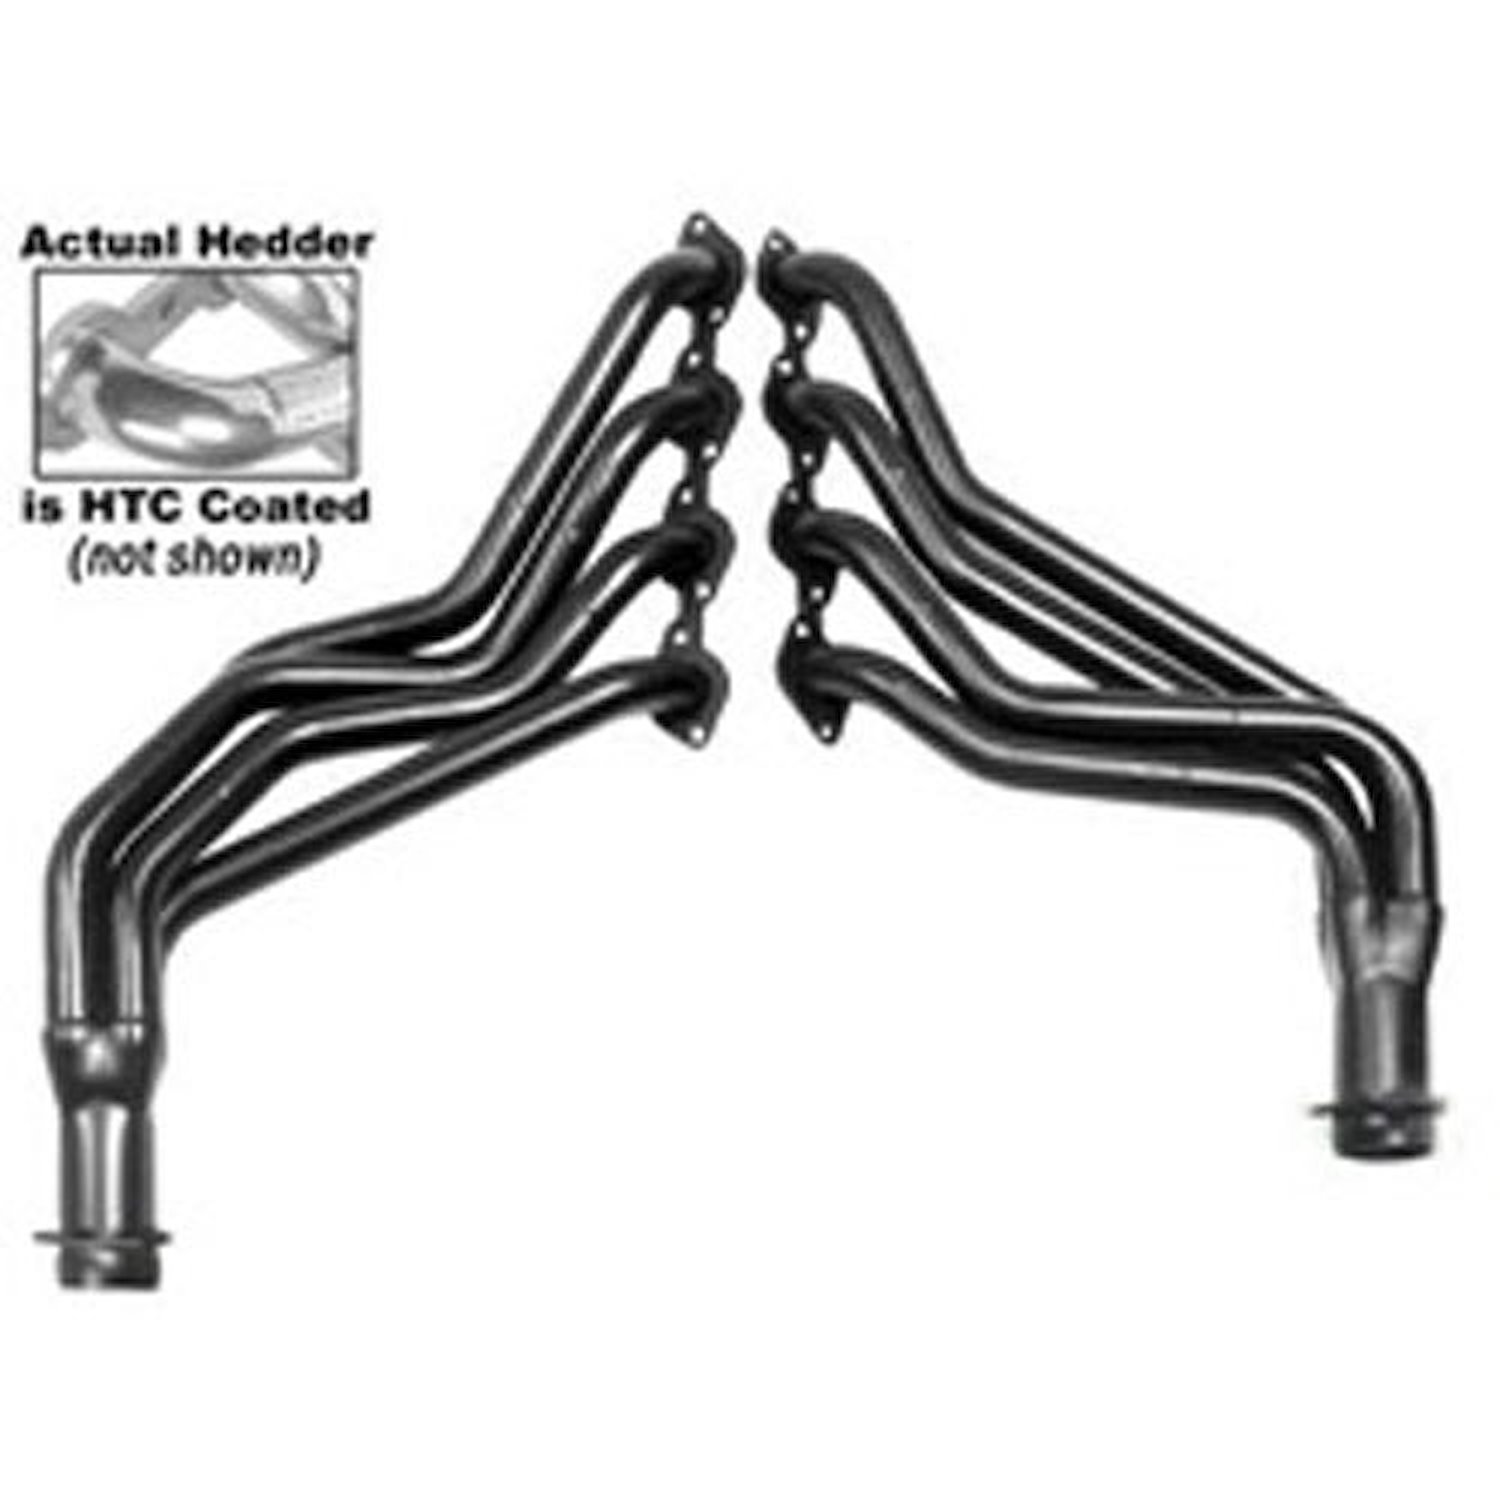 Standard Duty HTC Coated Full-Length Headers 1975-95 Chevy